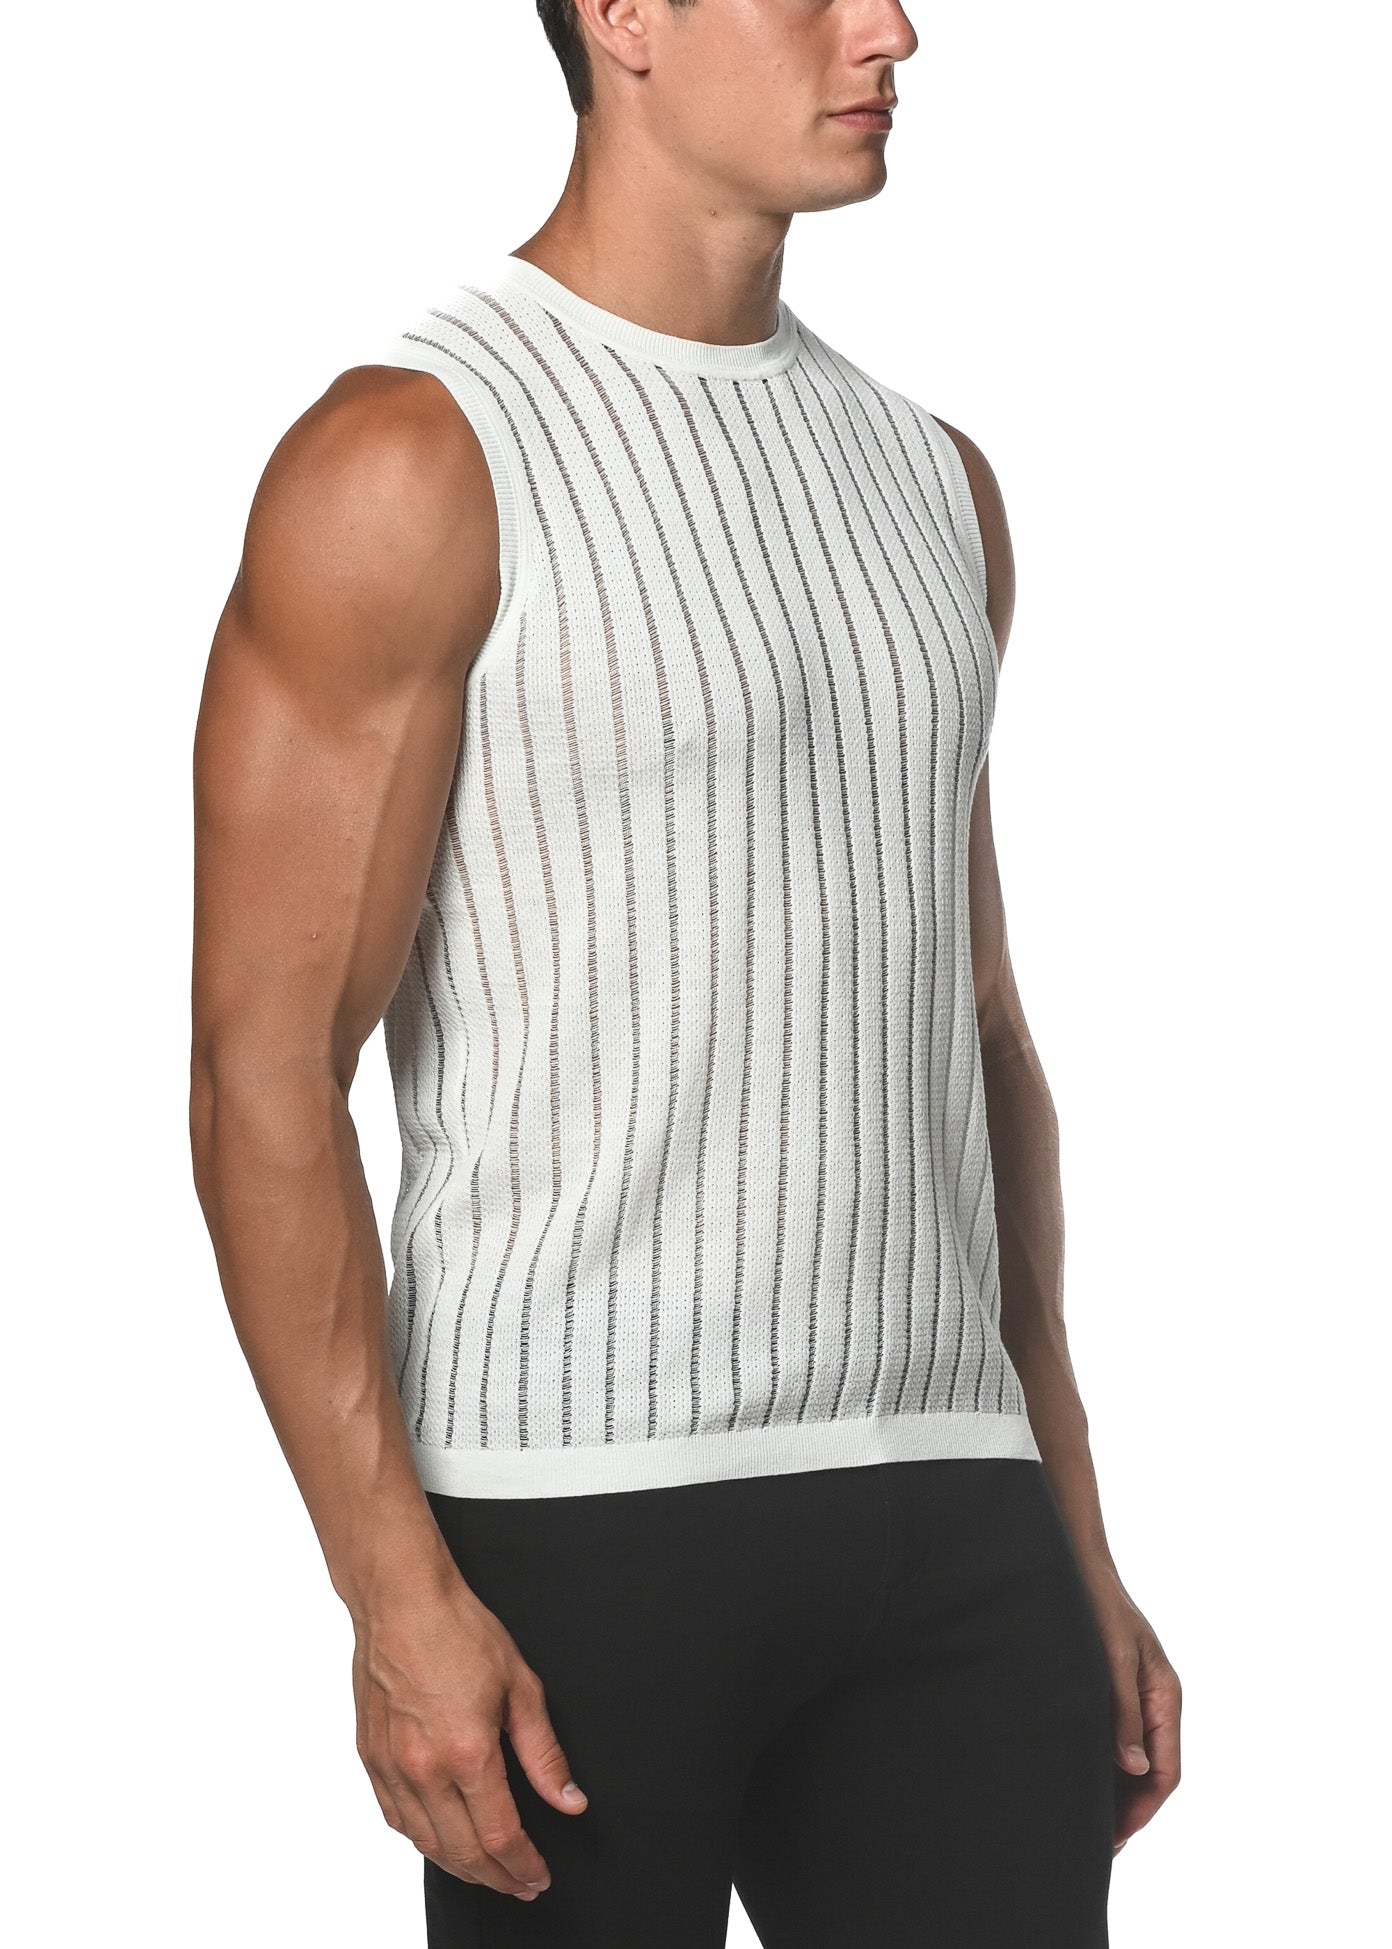 St33le Textured Knitted Vest